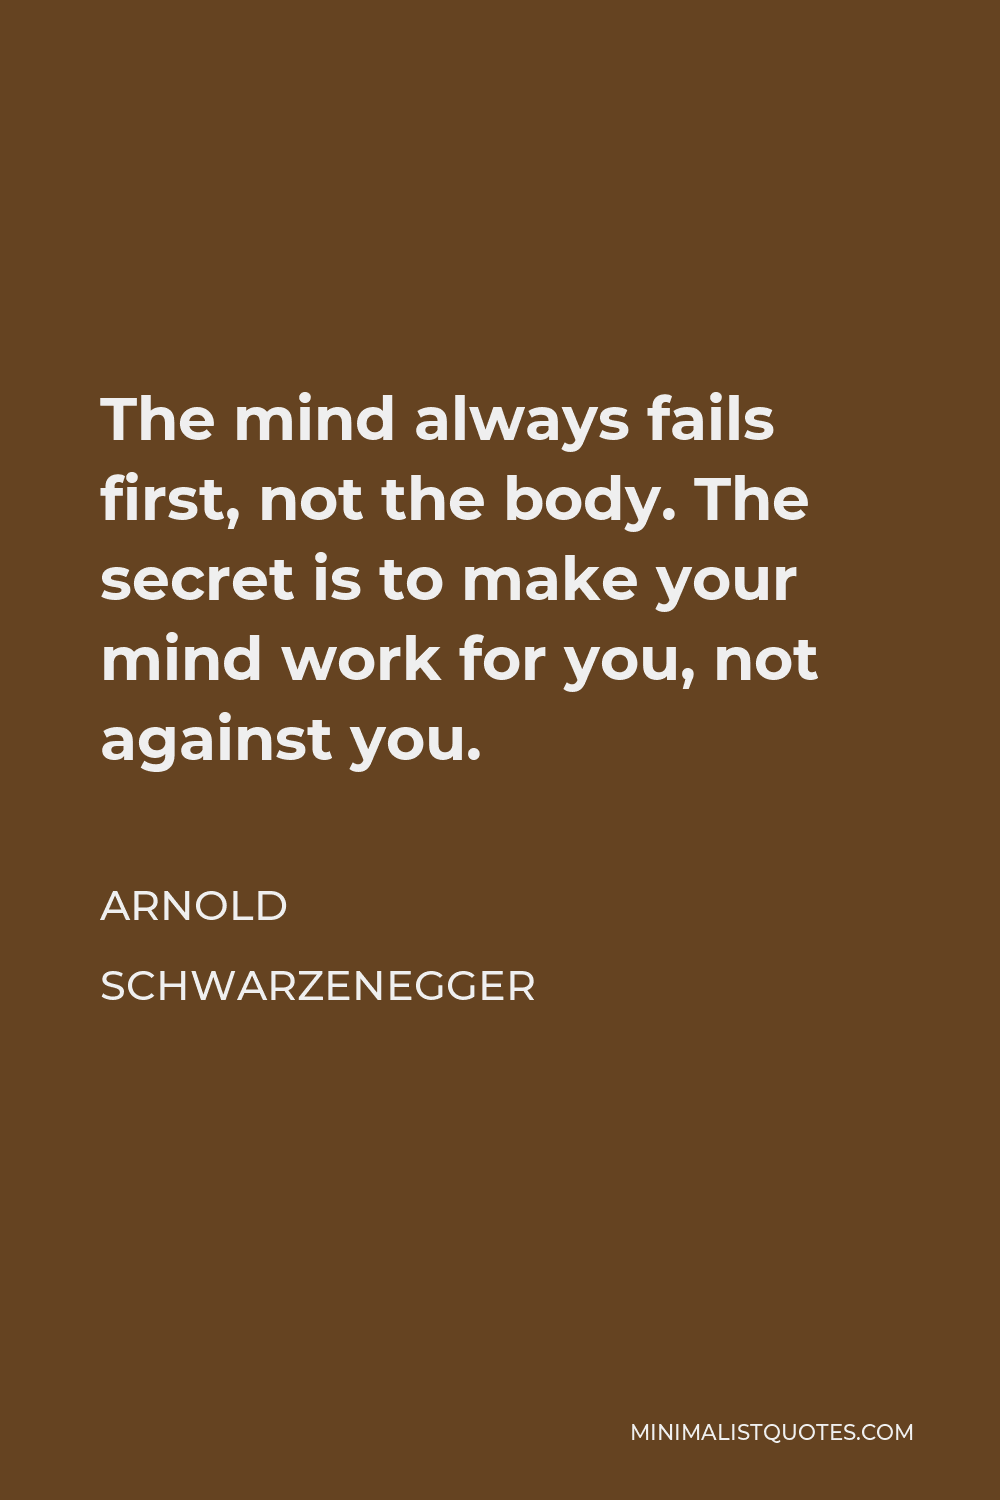 Arnold Schwarzenegger Quote - The mind always fails first, not the body. The secret is to make your mind work for you, not against you.